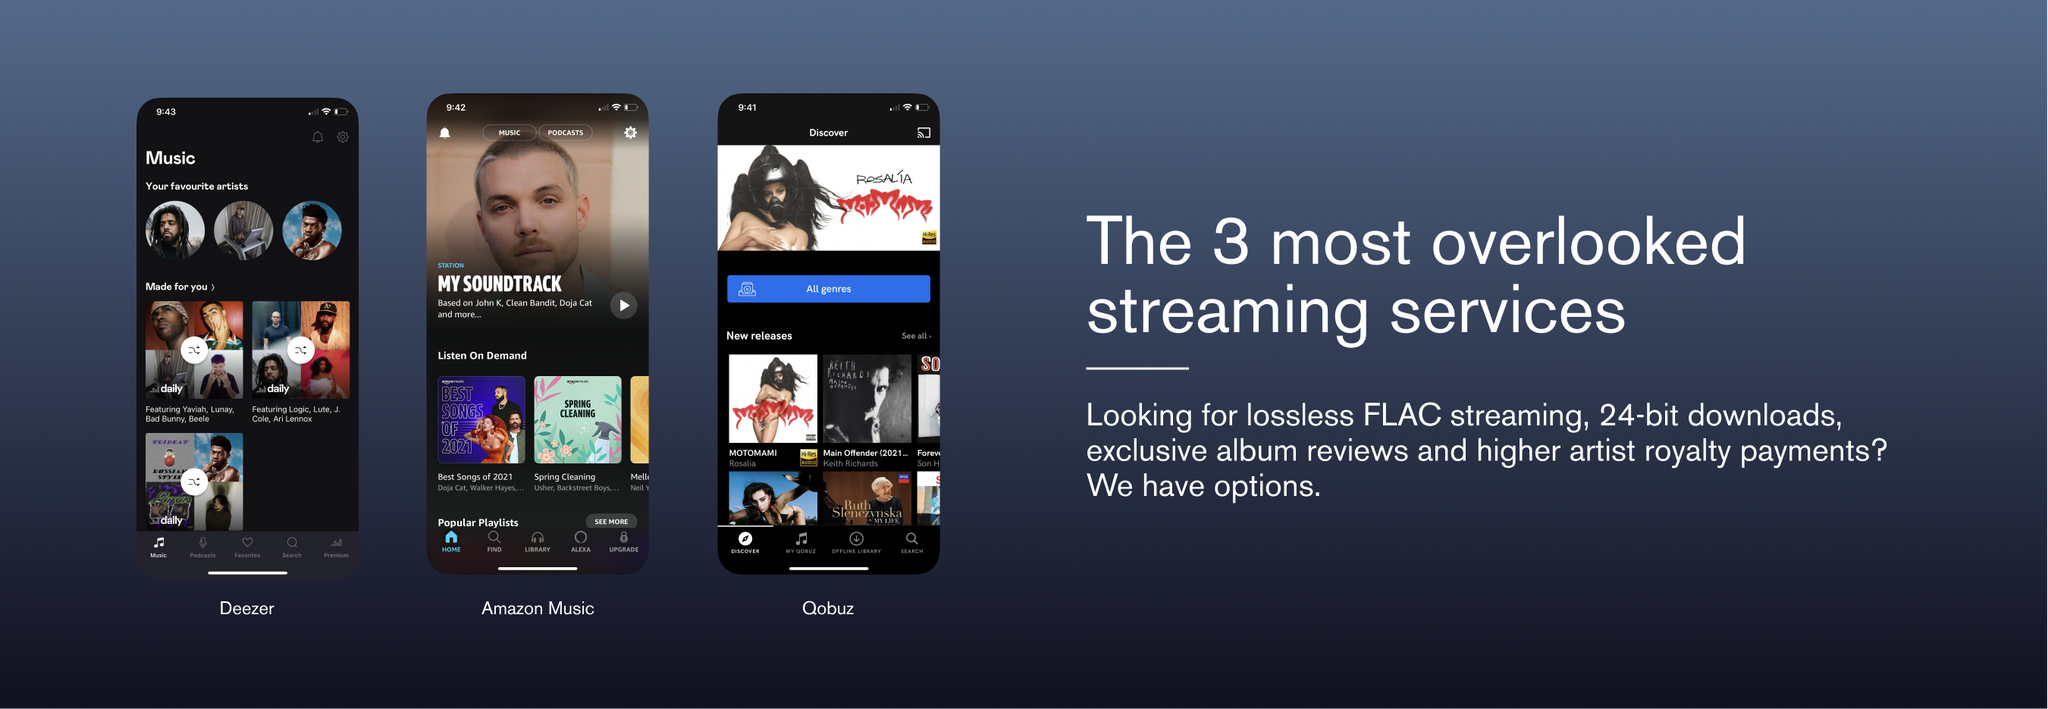 The 3 Most Overlooked Streaming Services